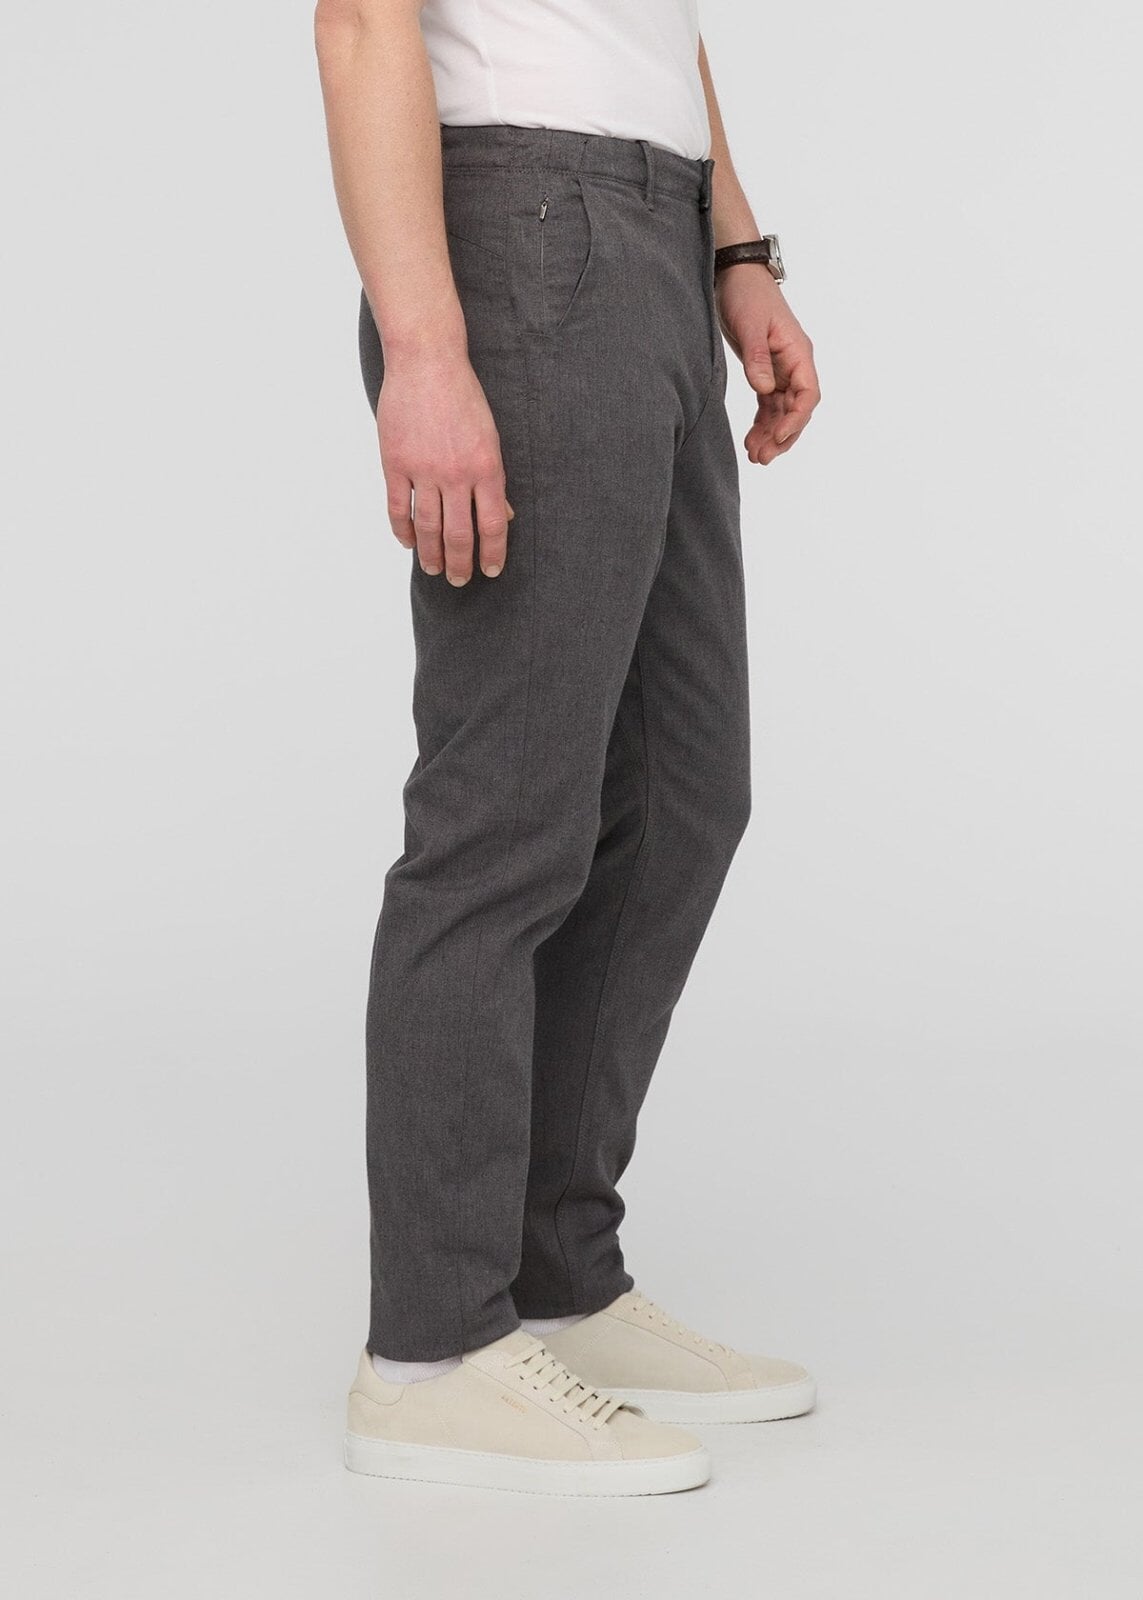 mens stretch heather grey chino pants side